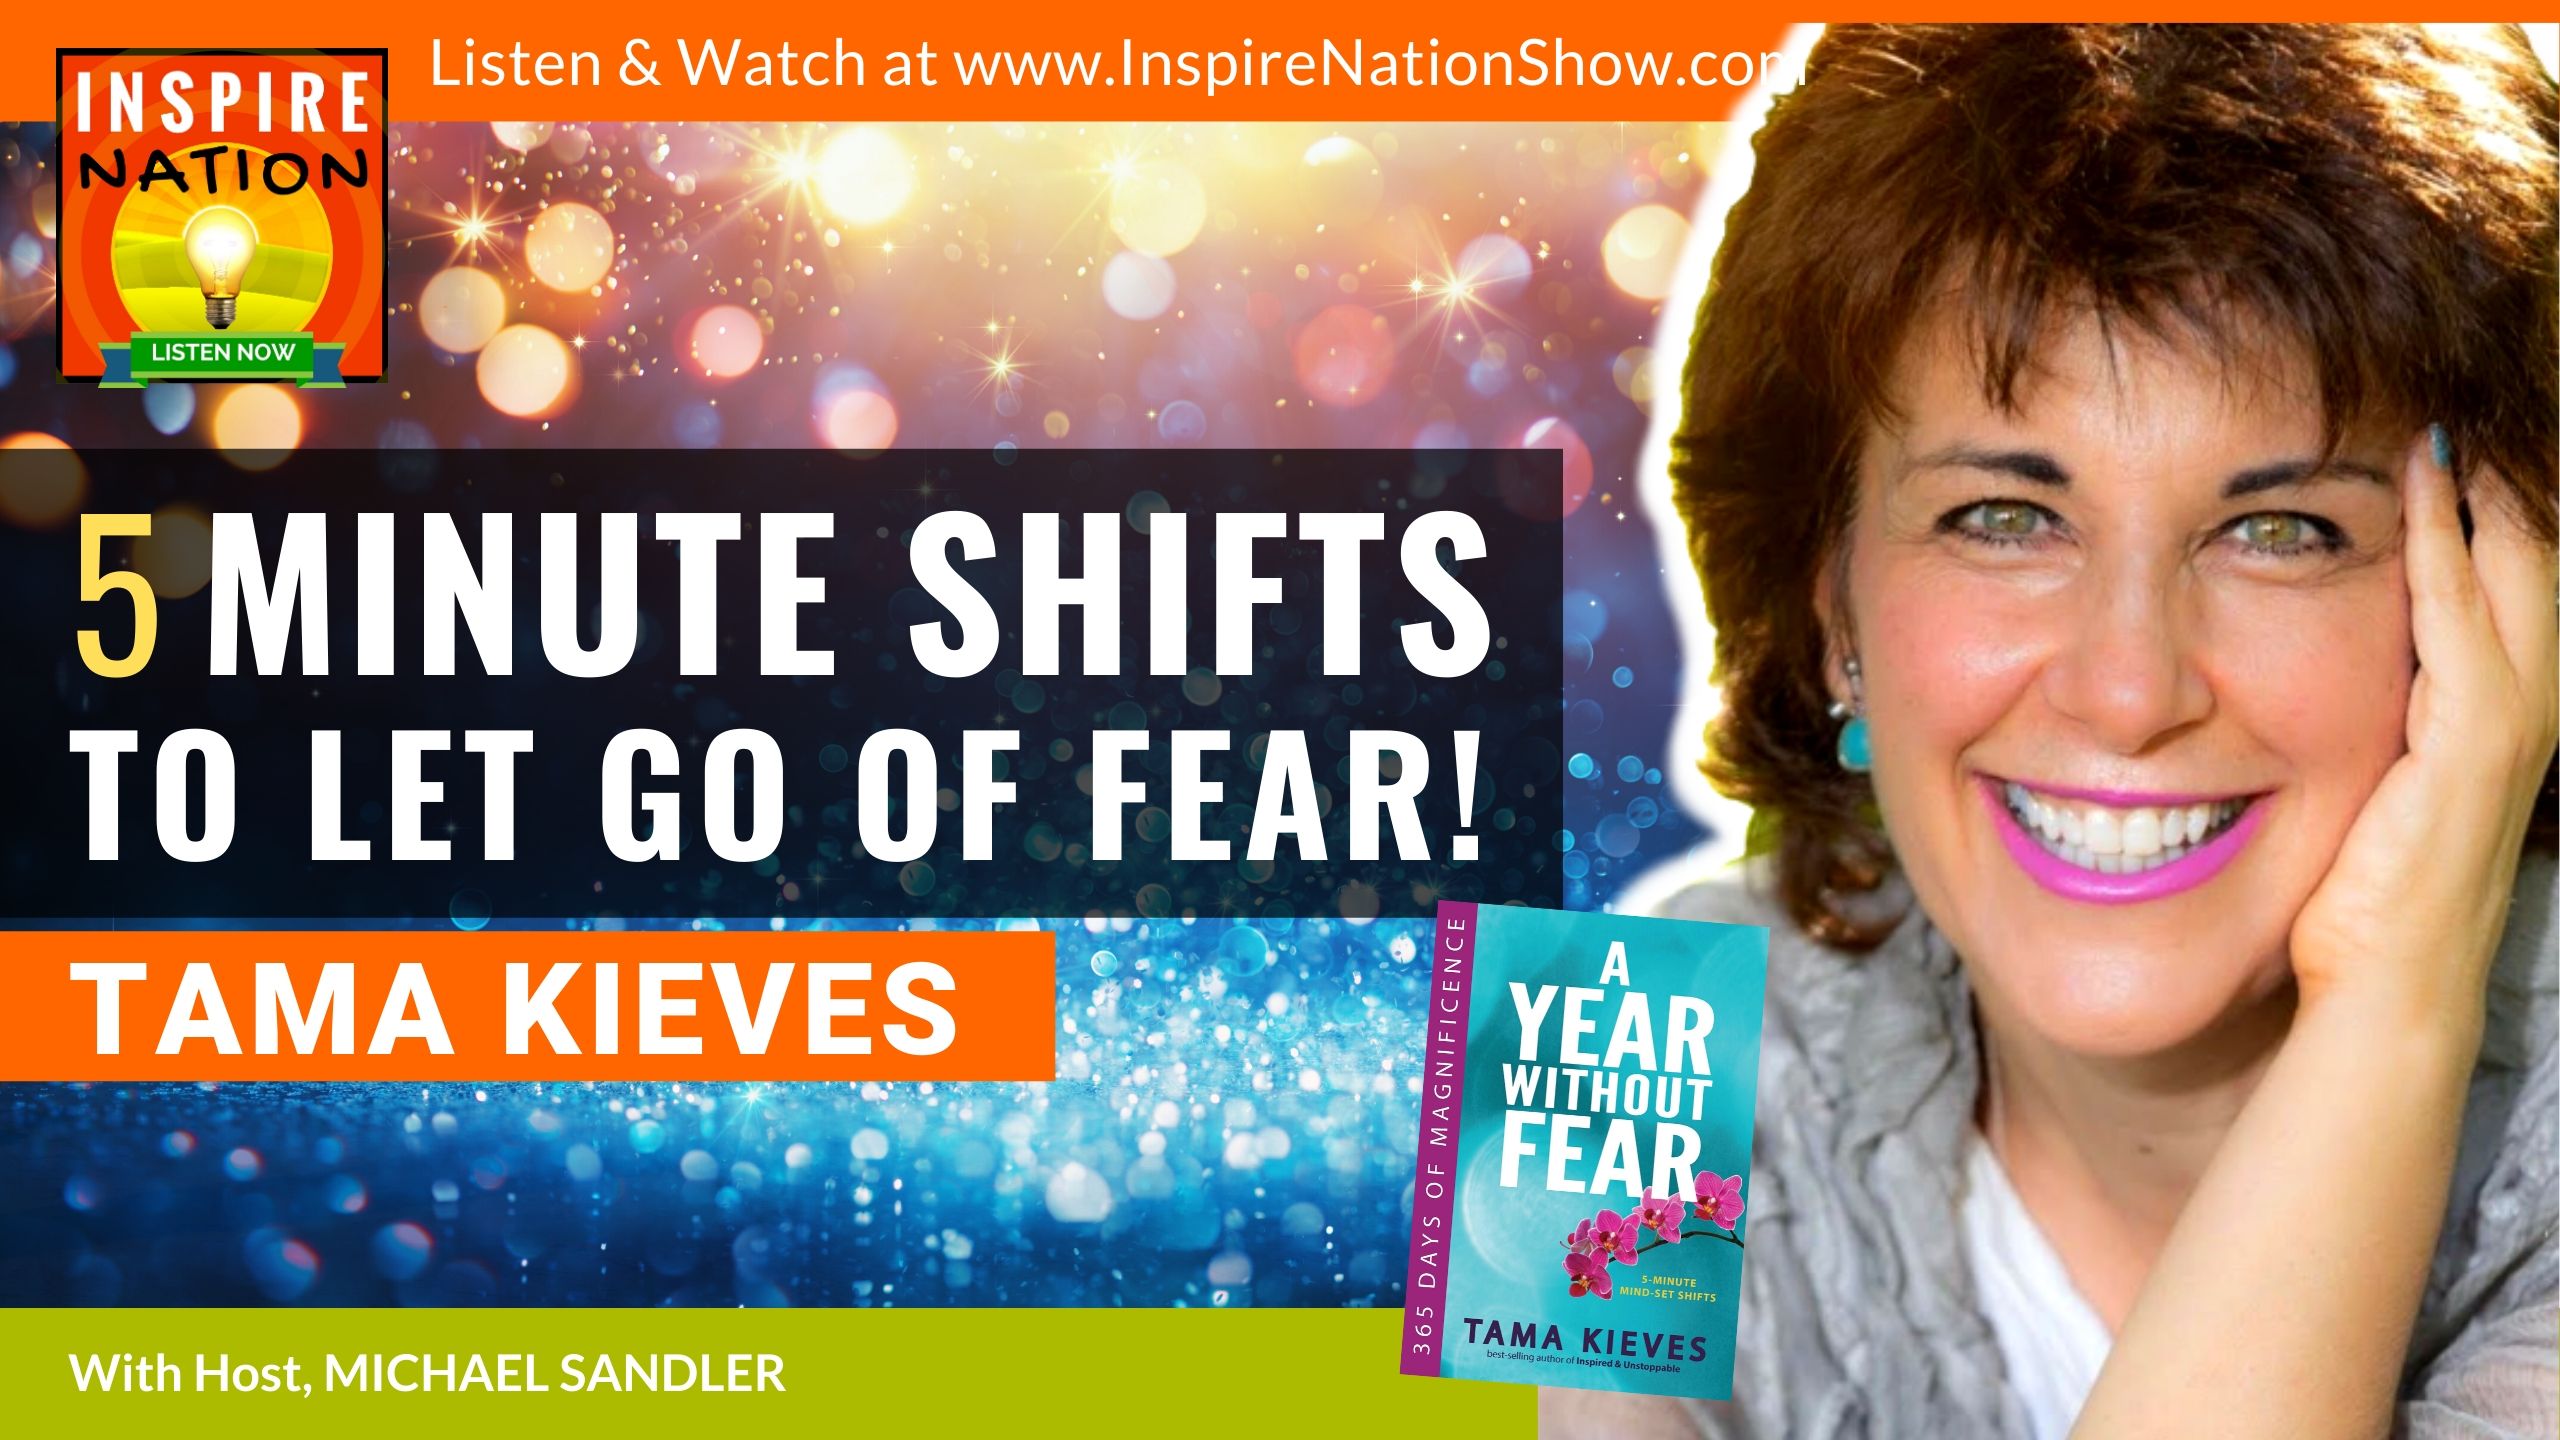 Michael Sandler interviews Tama Kieves on 5 minute shifts to help you let go of fear!